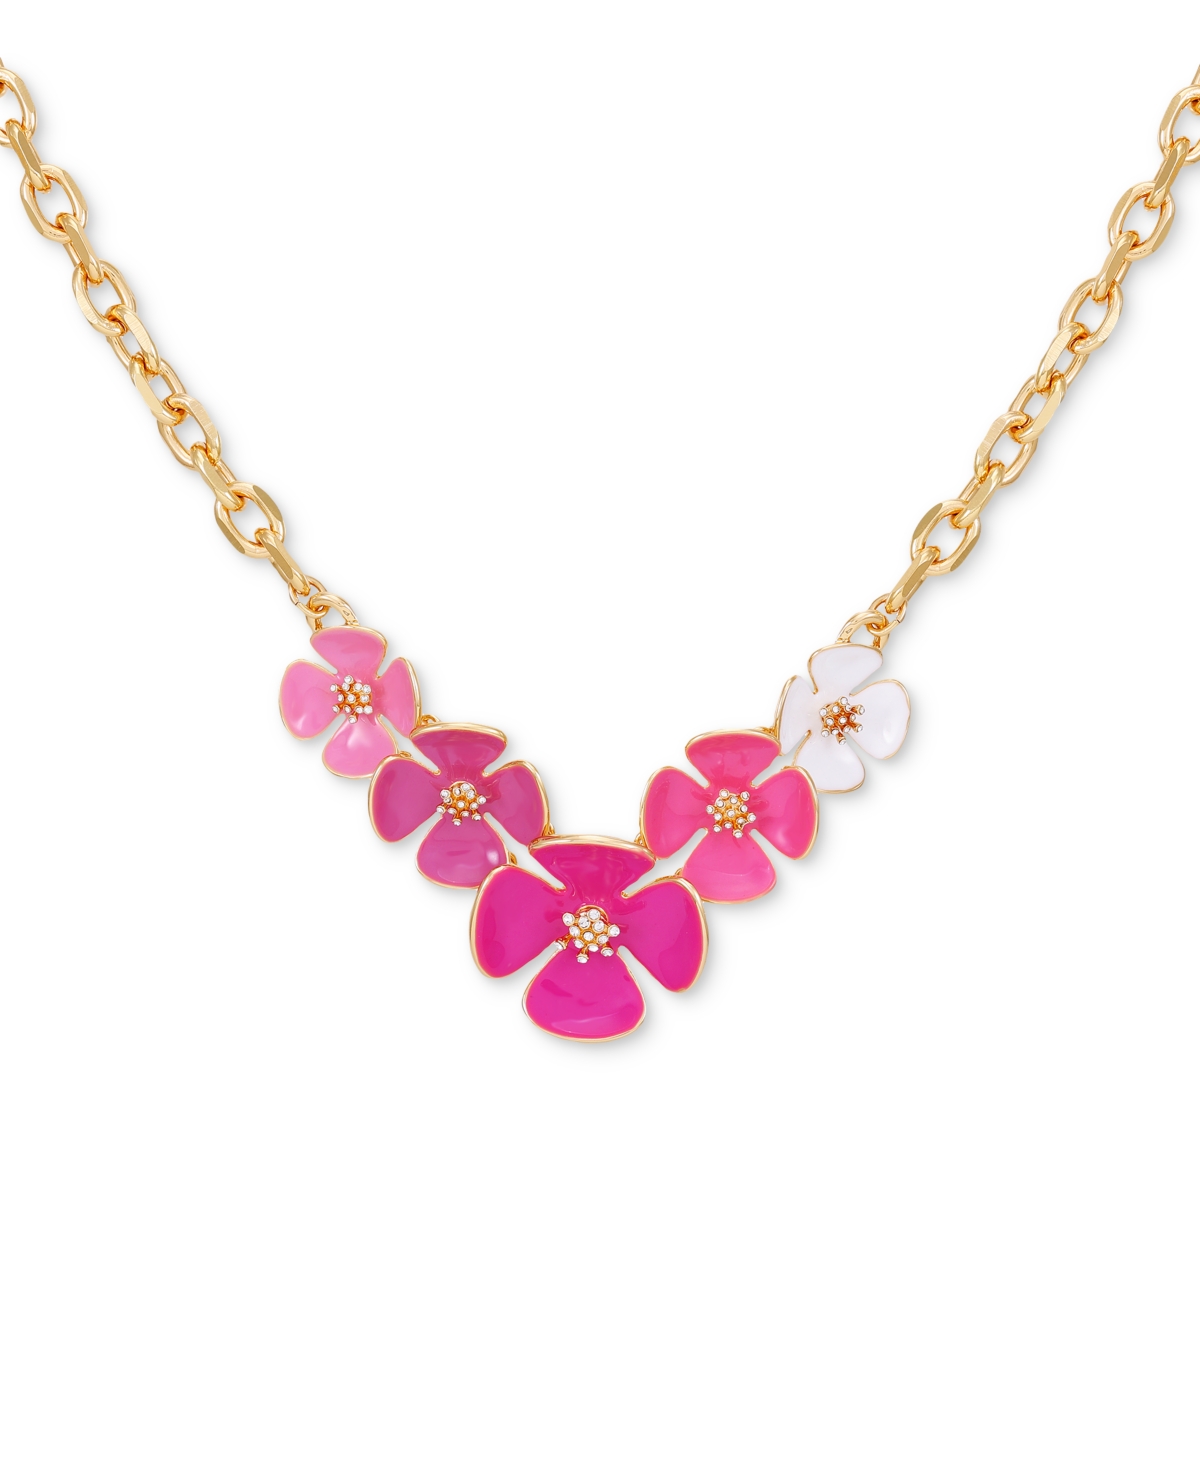 Guess Gold-tone Pink Flower Frontal Necklace, 18" + 2" Extender